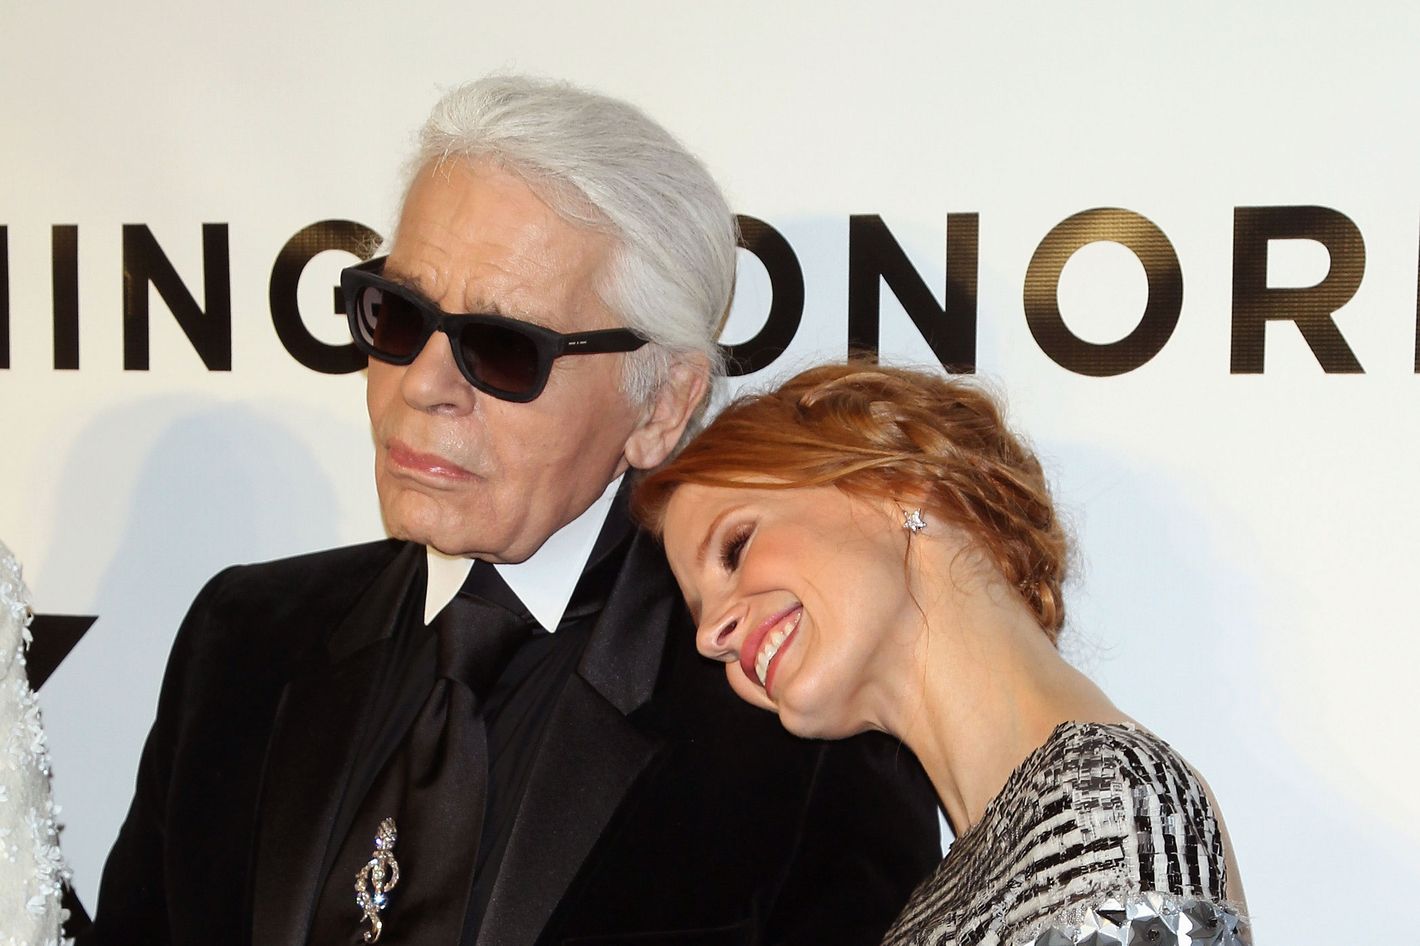 The Business of Being Karl Lagerfeld, Creator